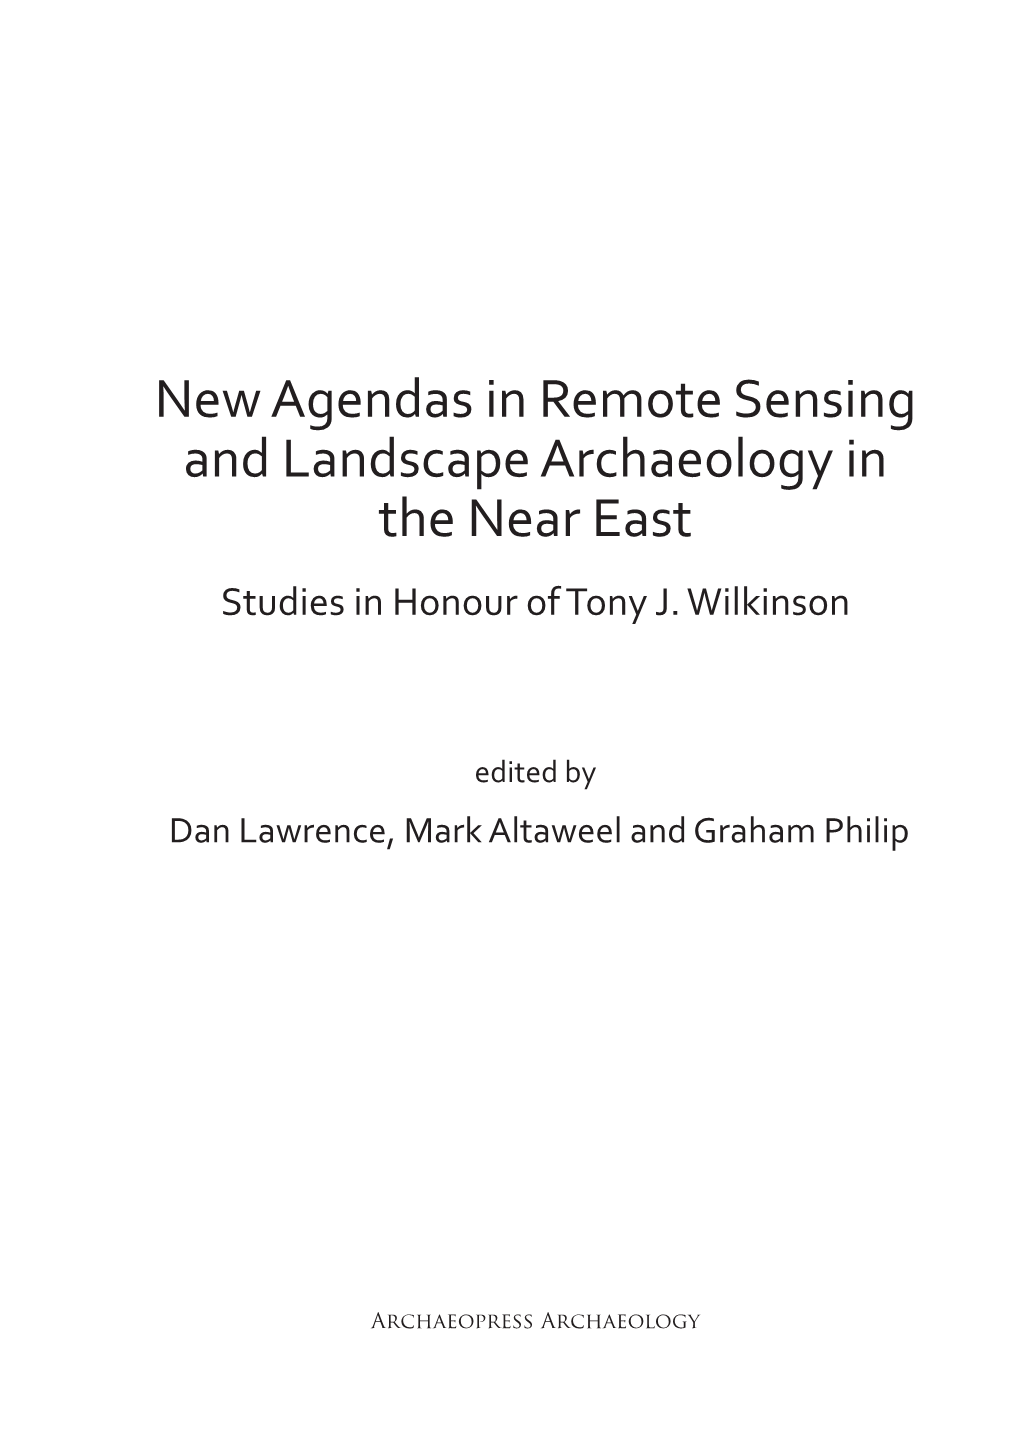 New Agendas in Remote Sensing and Landscape Archaeology in the Near East Studies in Honour of Tony J